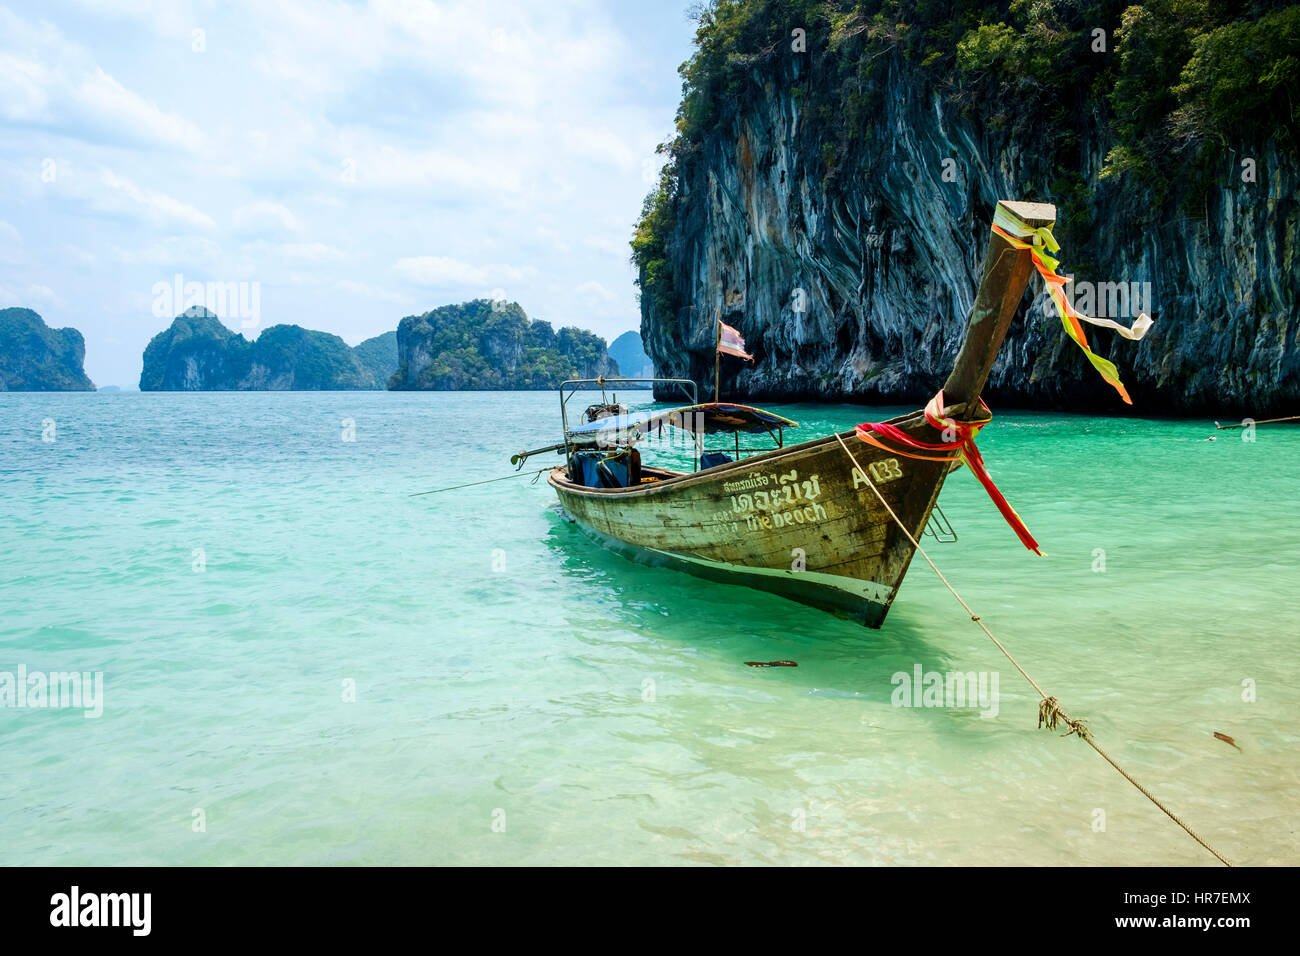 A Thai long-tail boat moored off the coast in the Krabi Province, Thailand. These boats are one of the main means of transportation in Thailand. Stock Photo